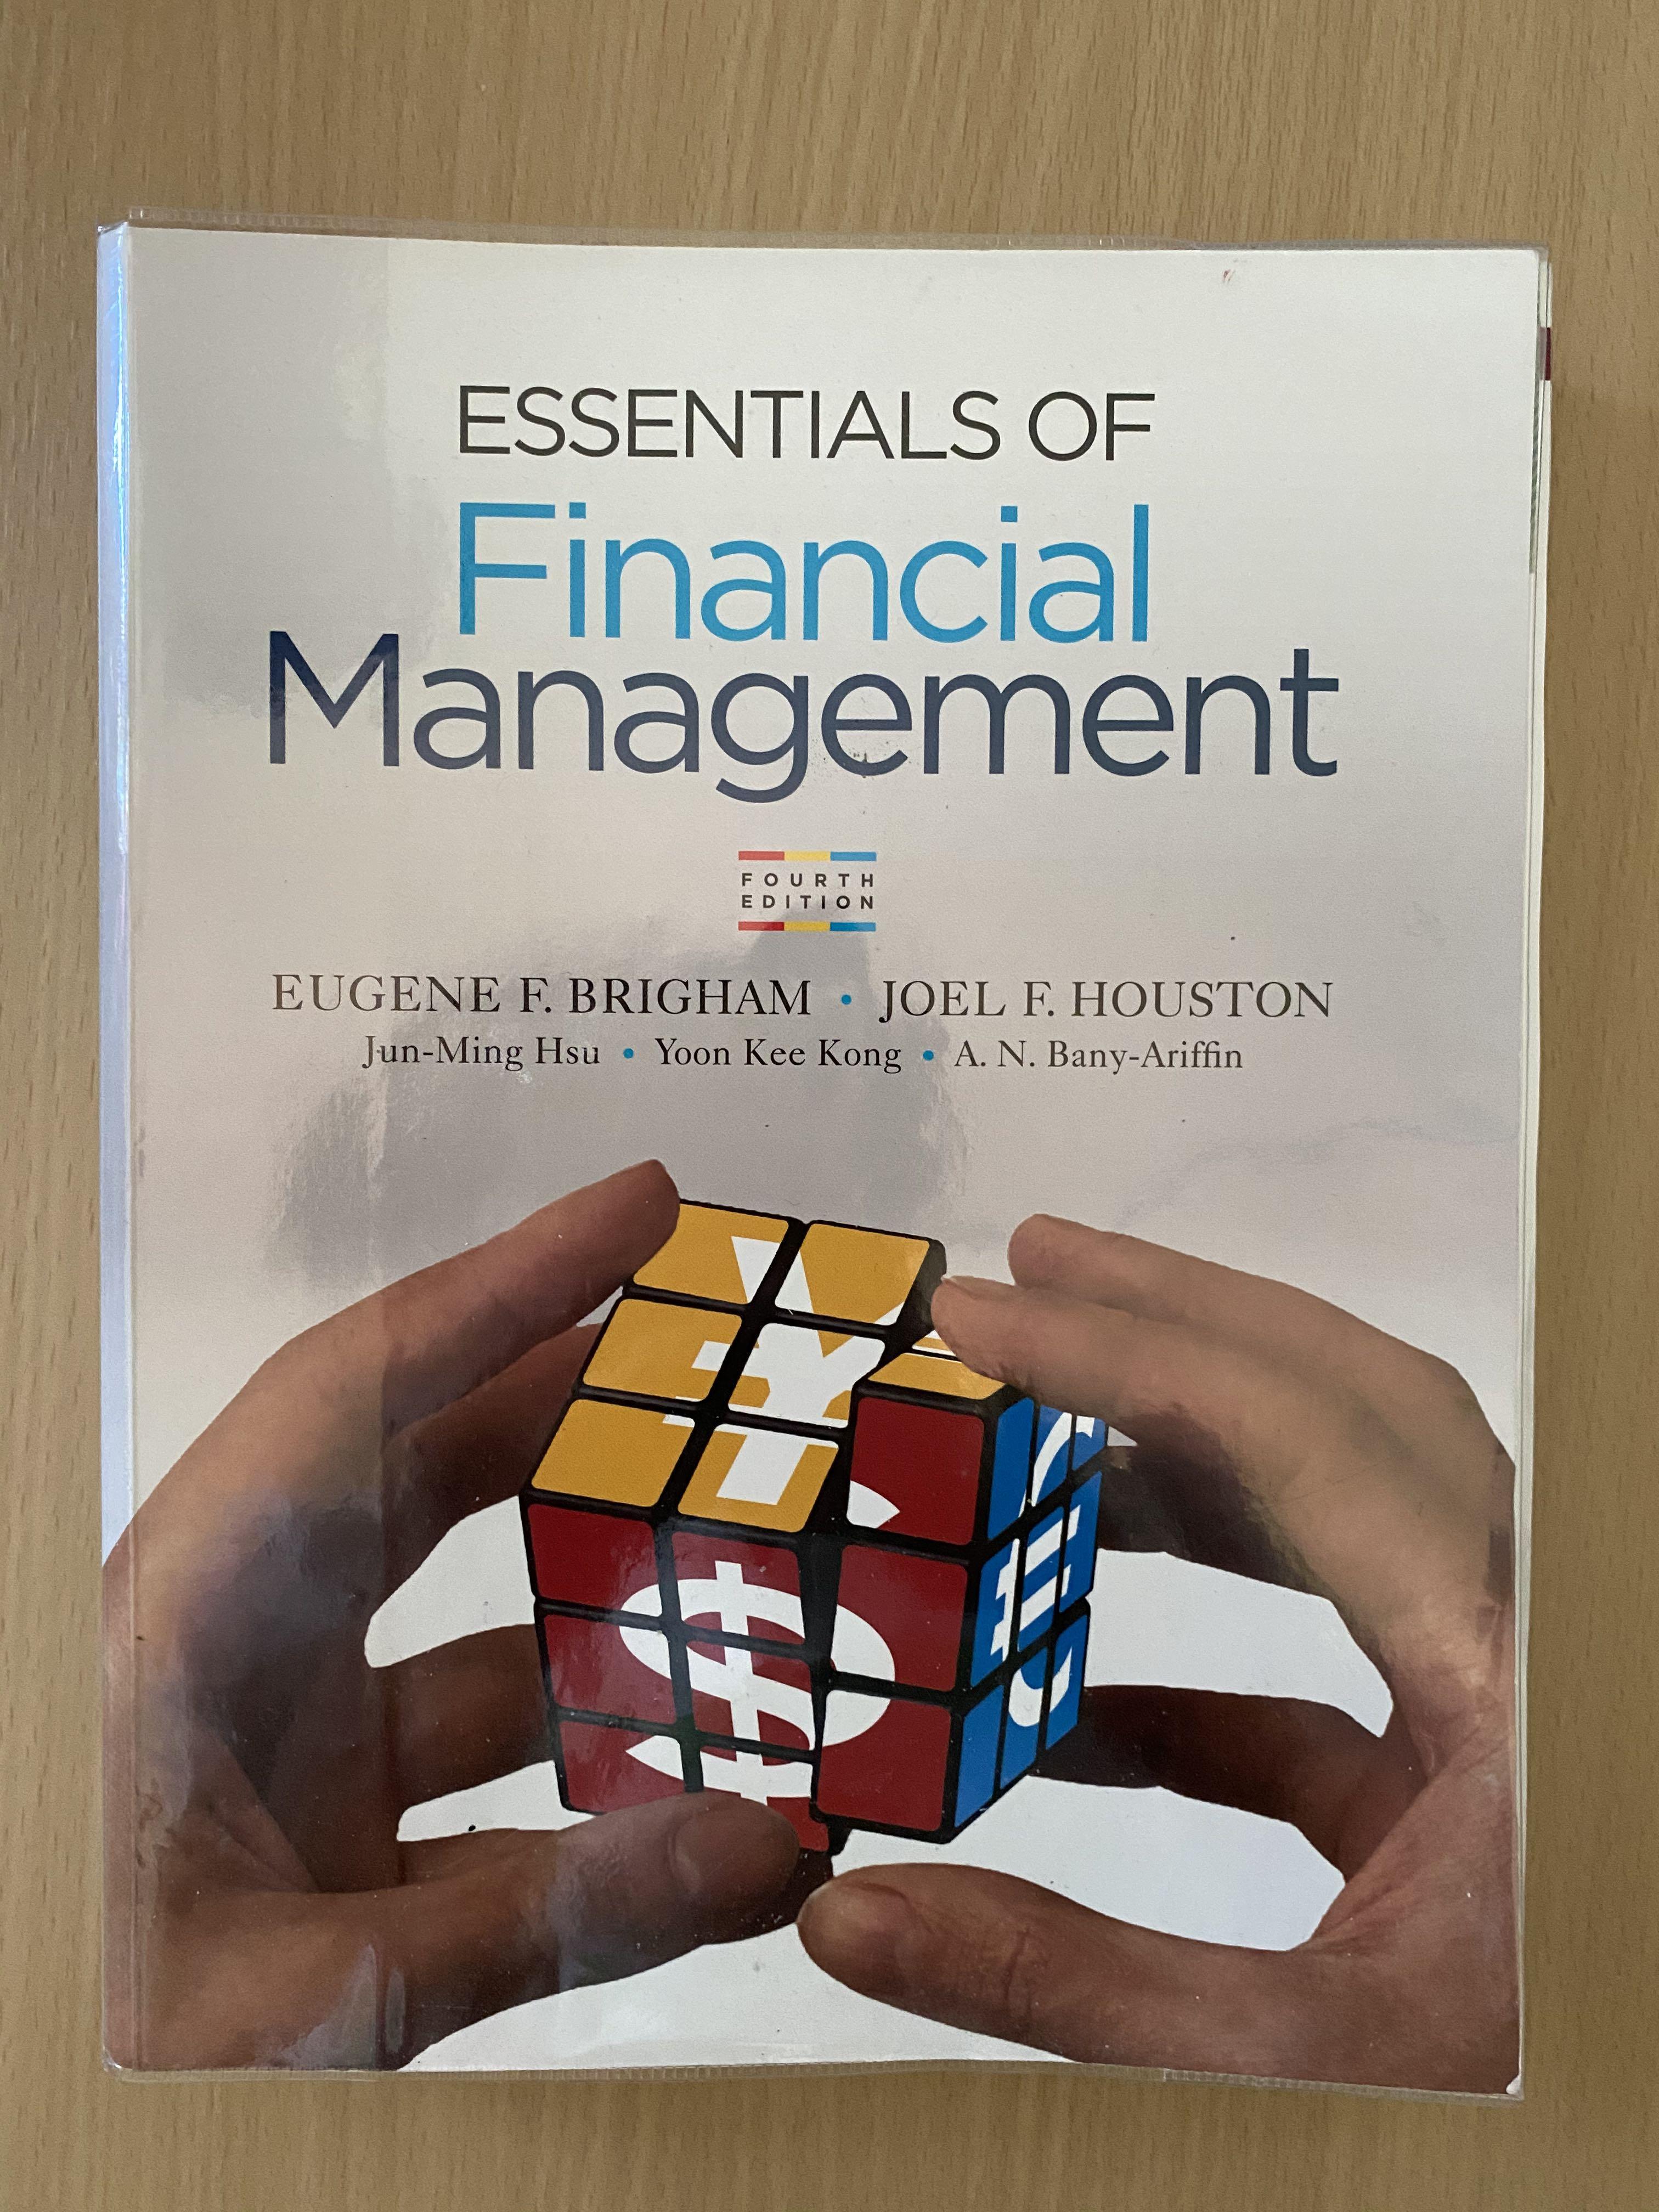 research on financial management